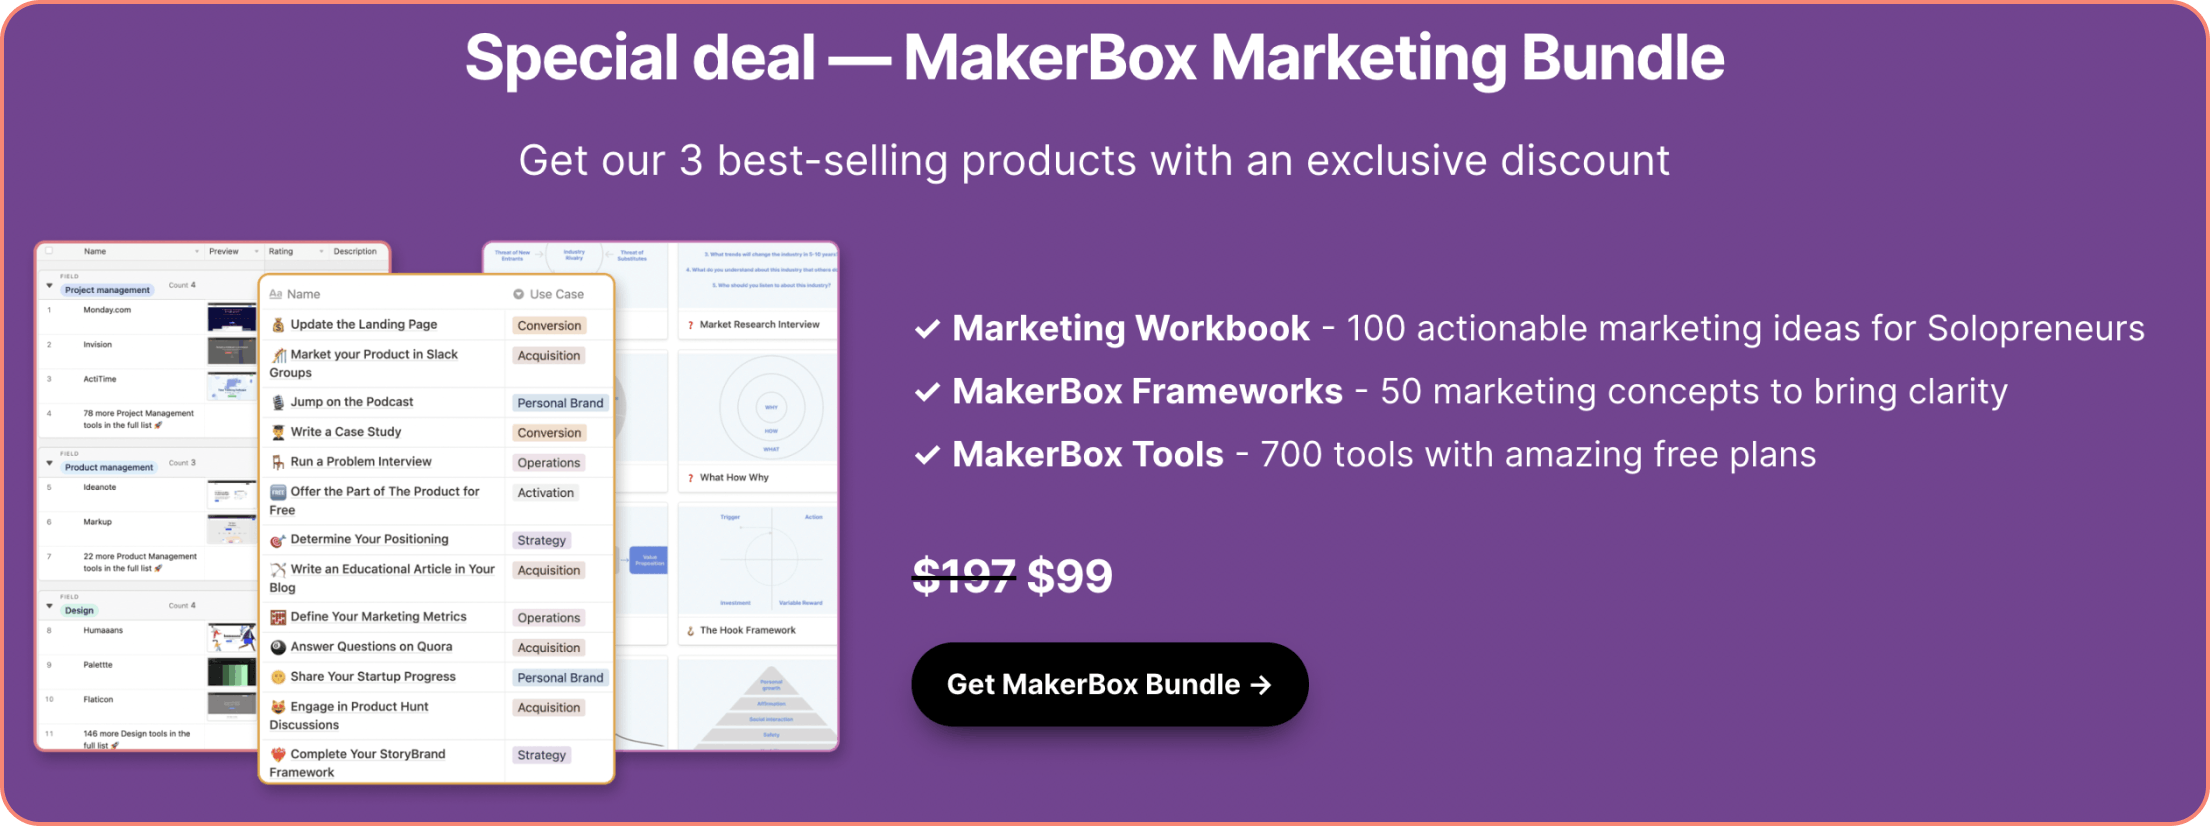 MakerBox Bundle with 3 products